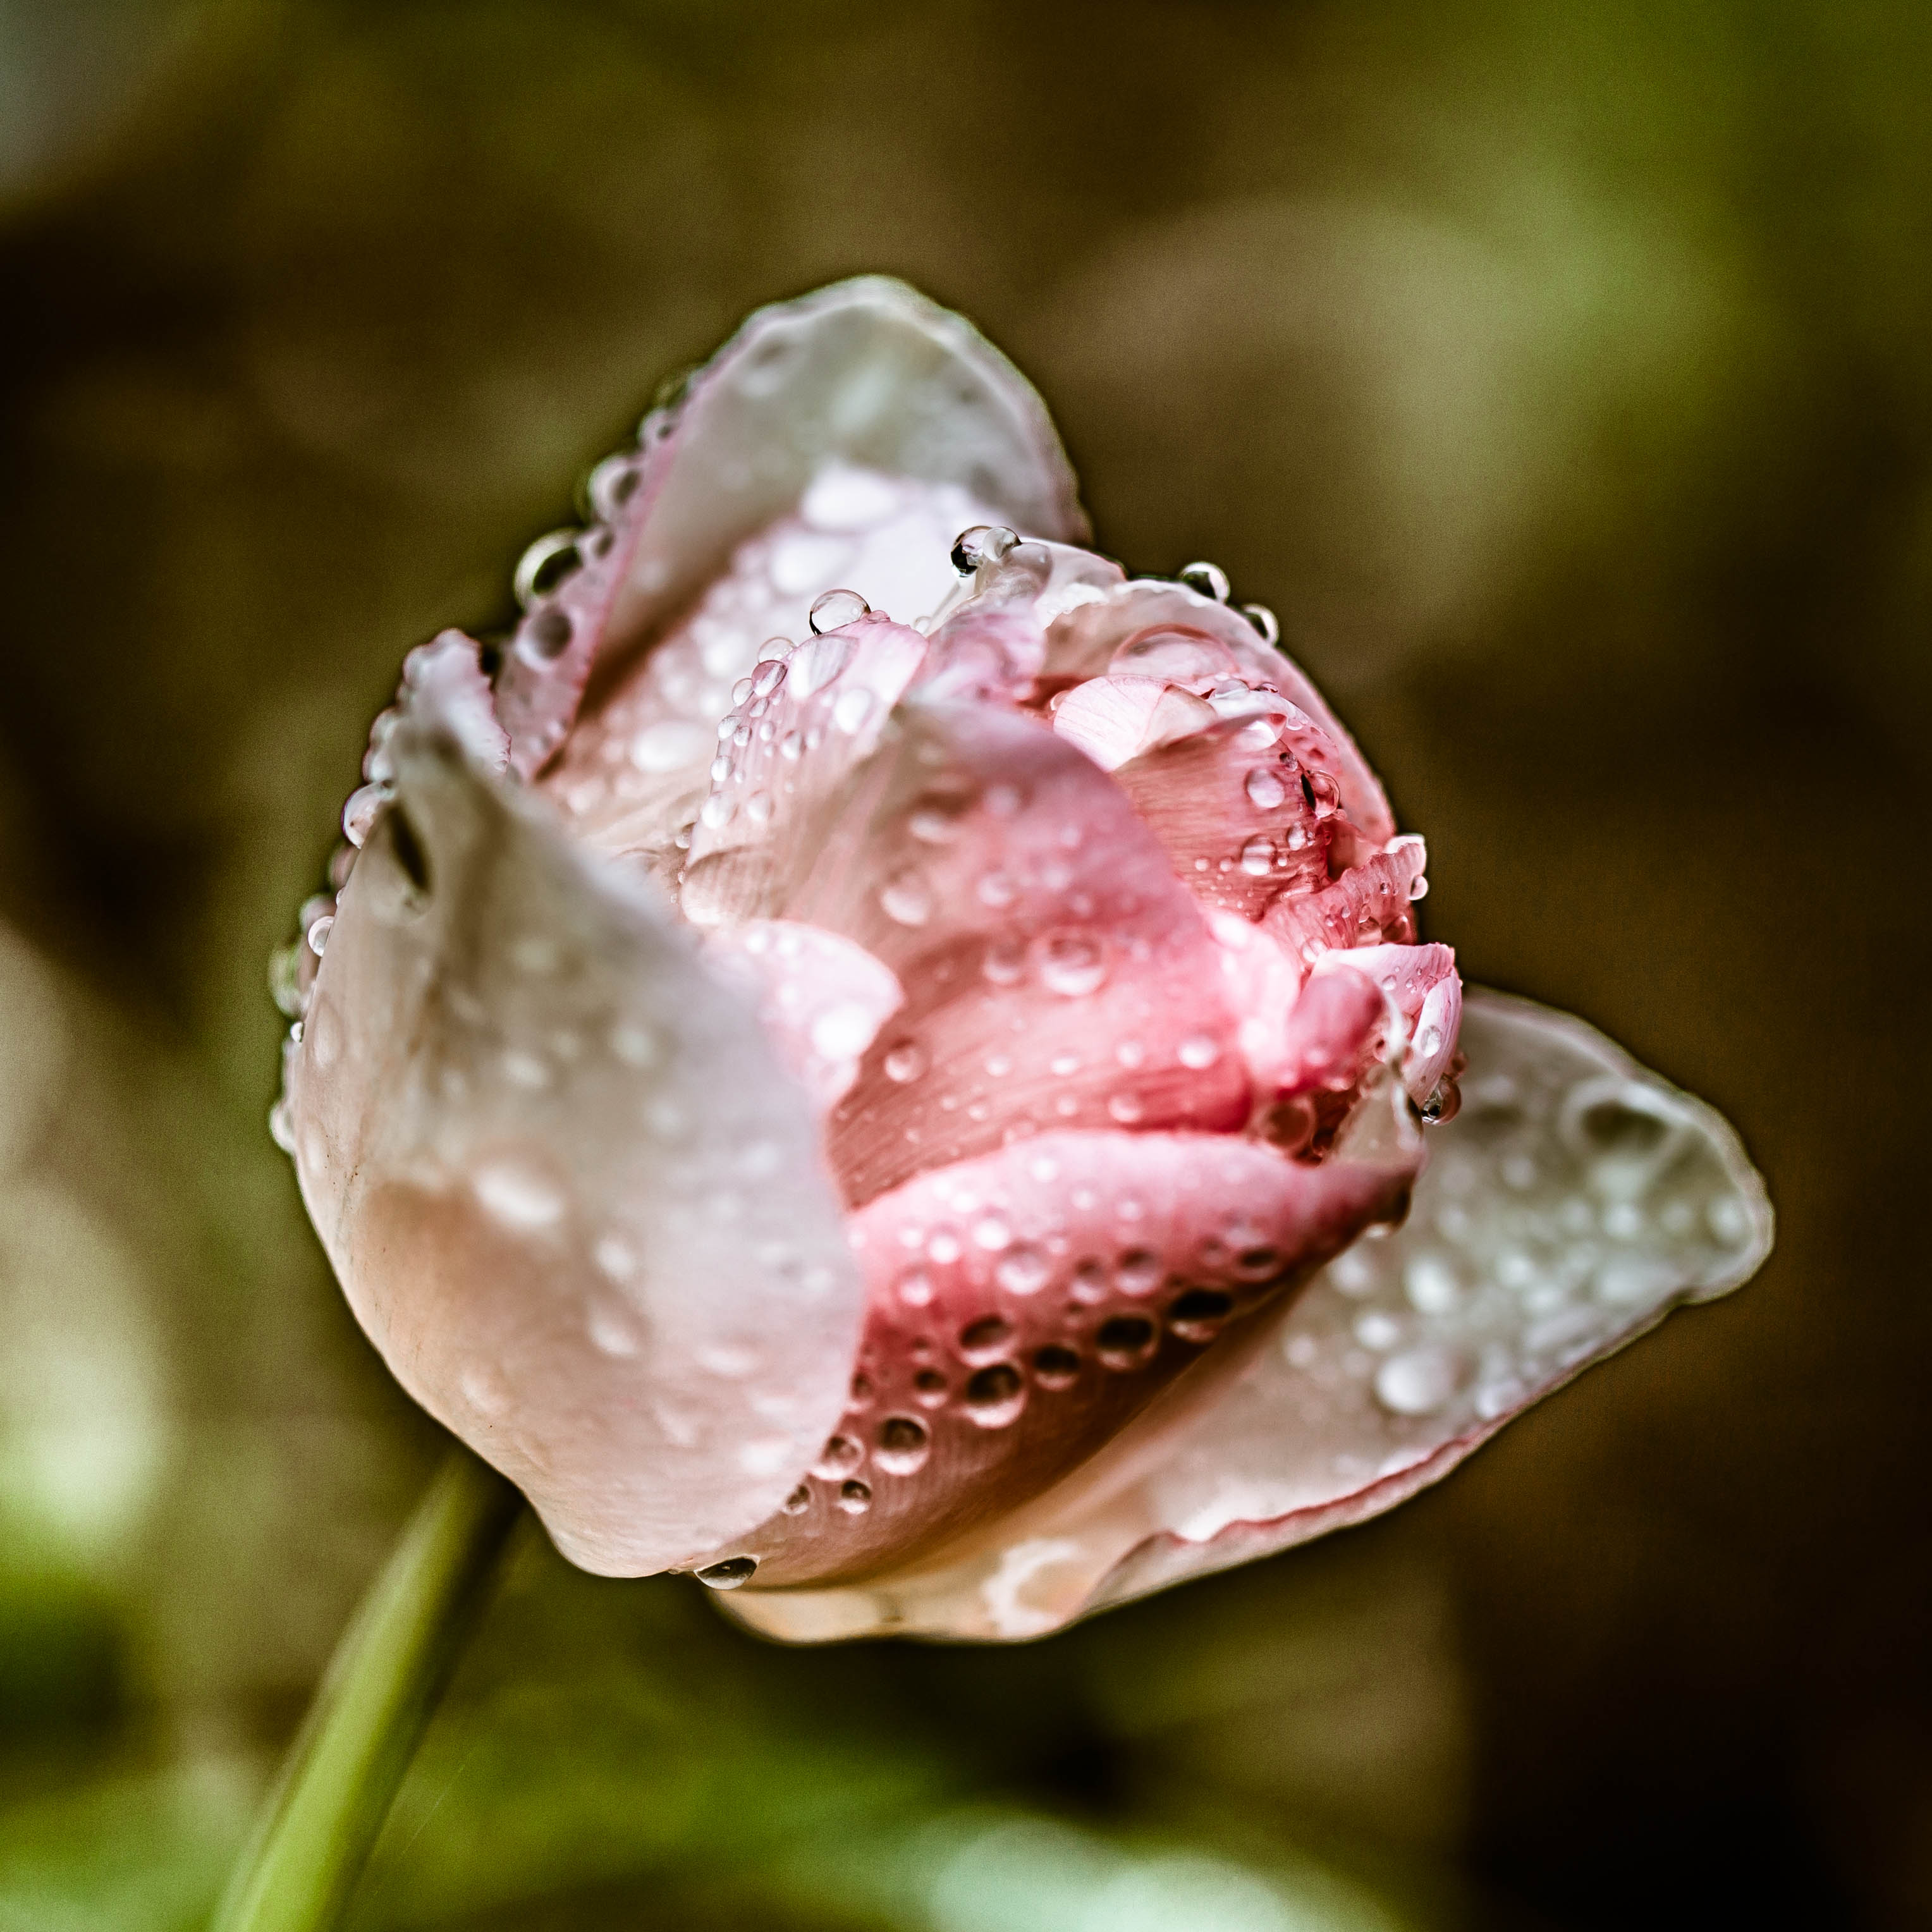 _MG_5170Wet rose.jpg undefined by WPC-187